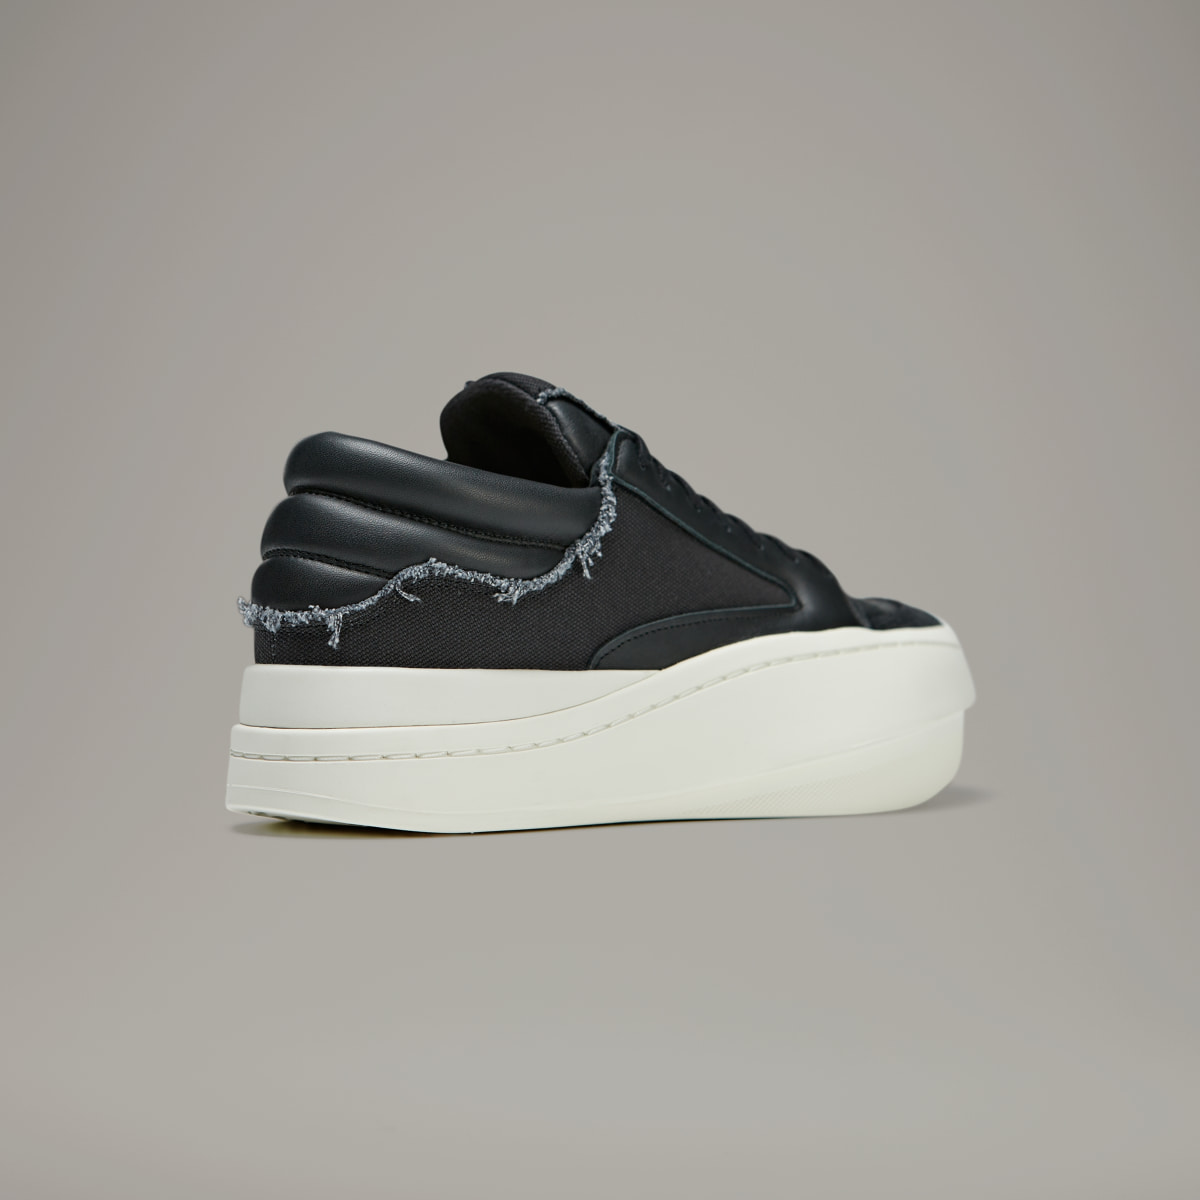 Adidas Y-3 Centennial Low Shoes. 5